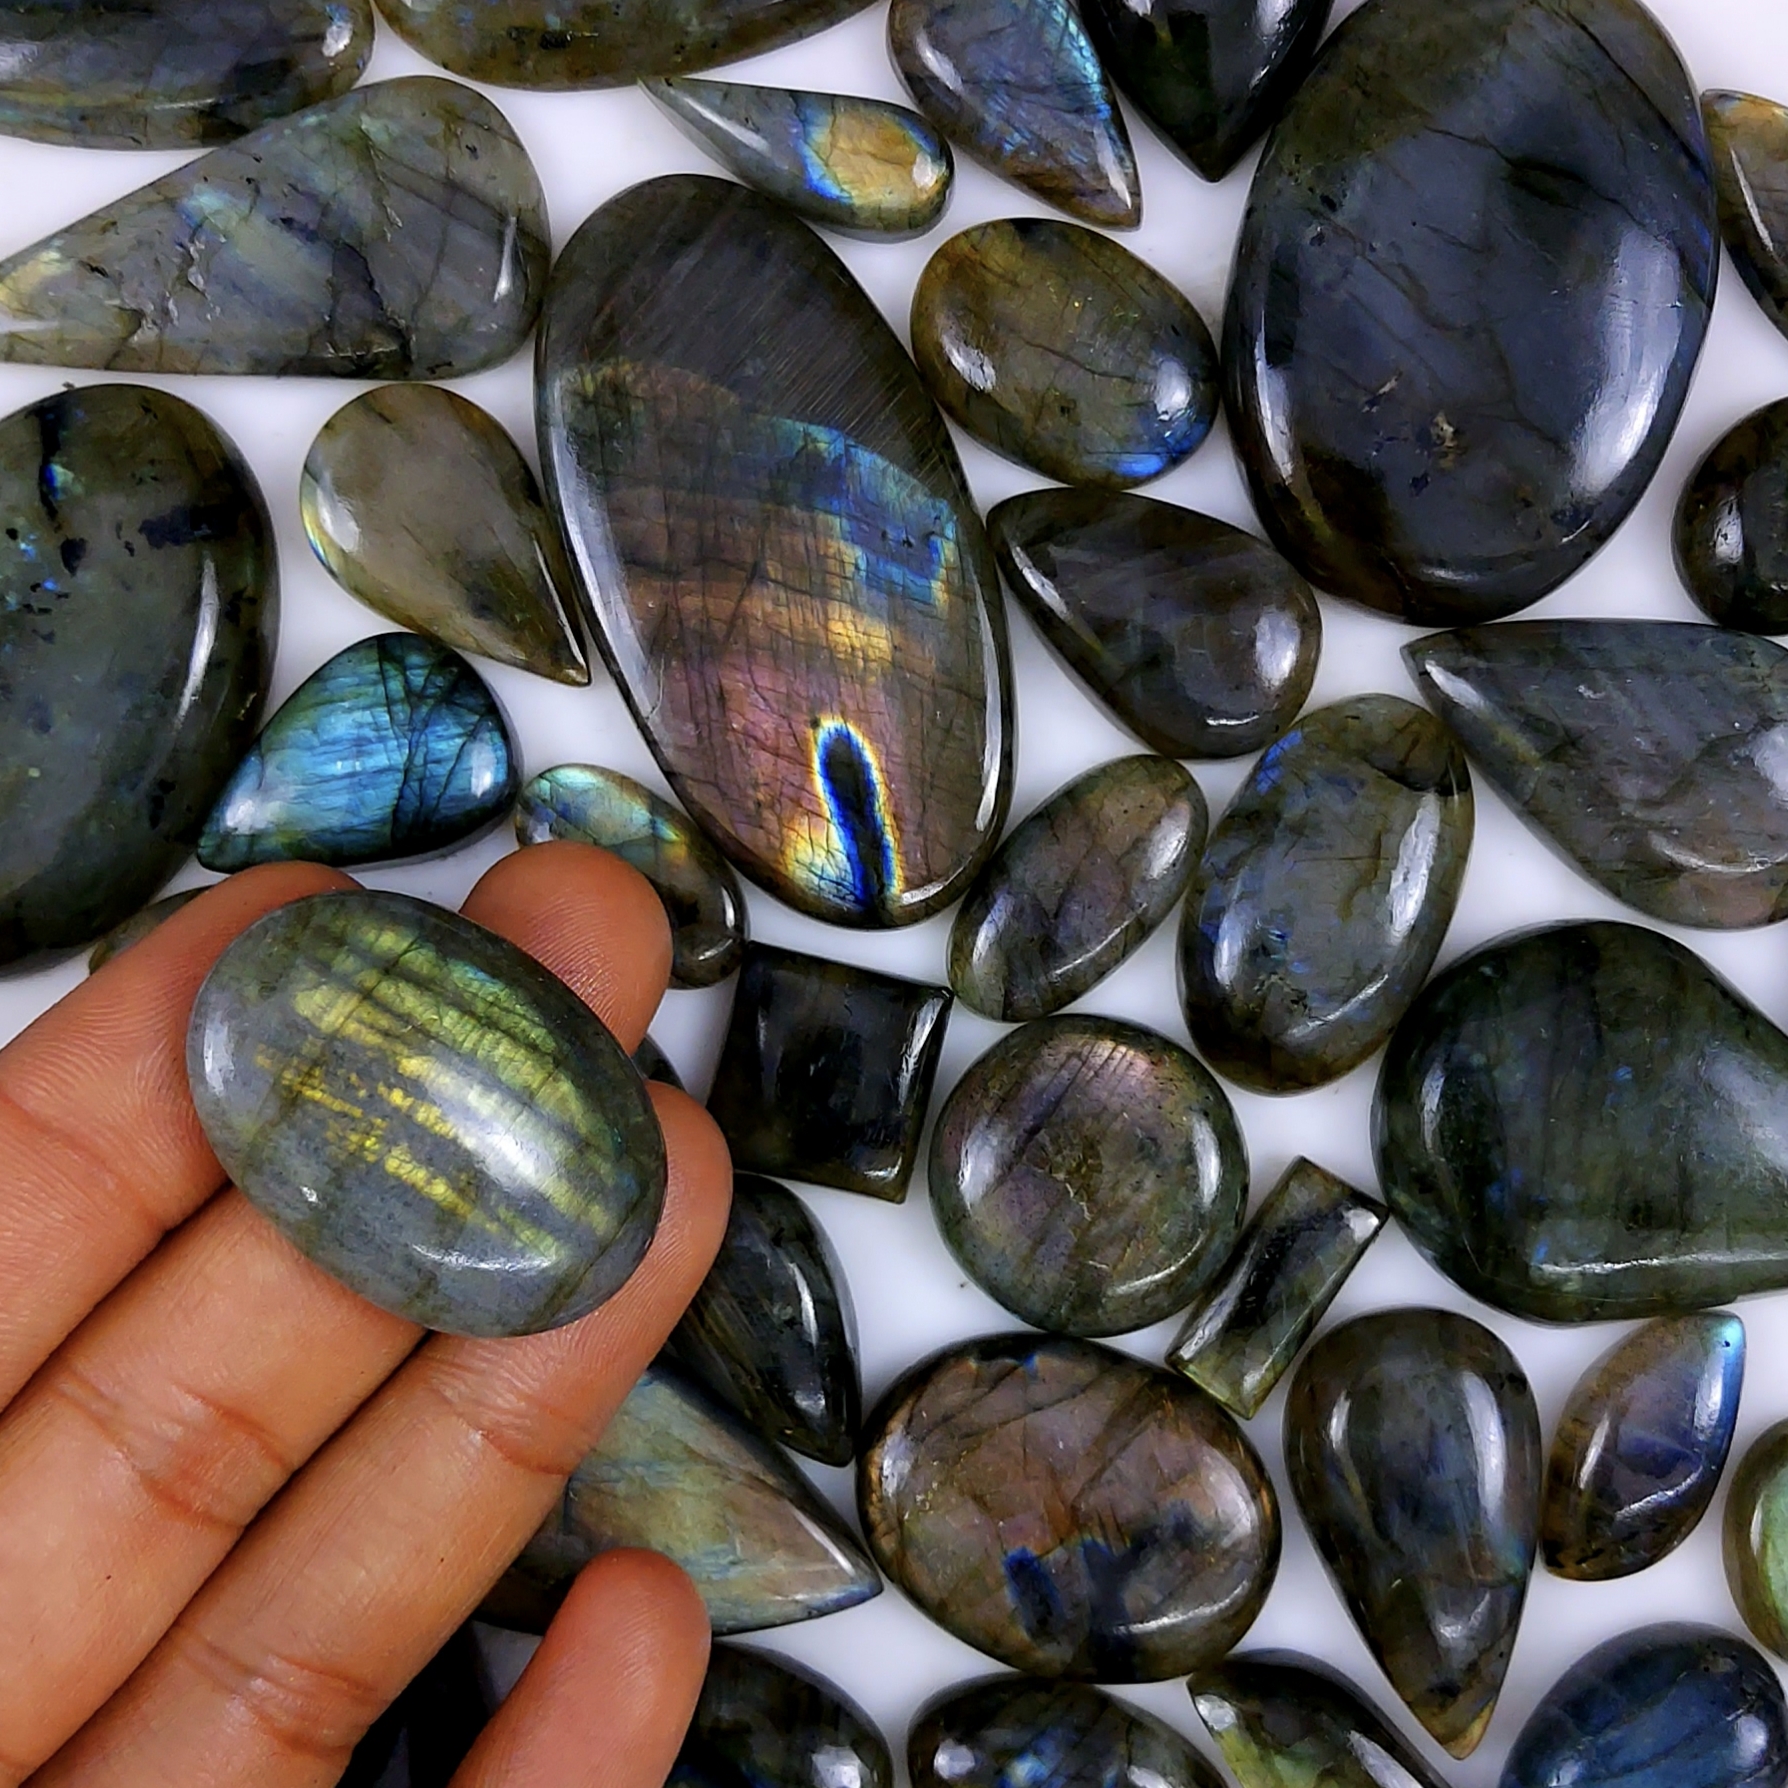 42pc 1660Cts Labradorite Cabochon Multifire Healing Crystal For Jewelry Supplies, Labradorite Necklace Handmade Wire Wrapped Gemstone Pendant 62x30 20x15 mm#6372